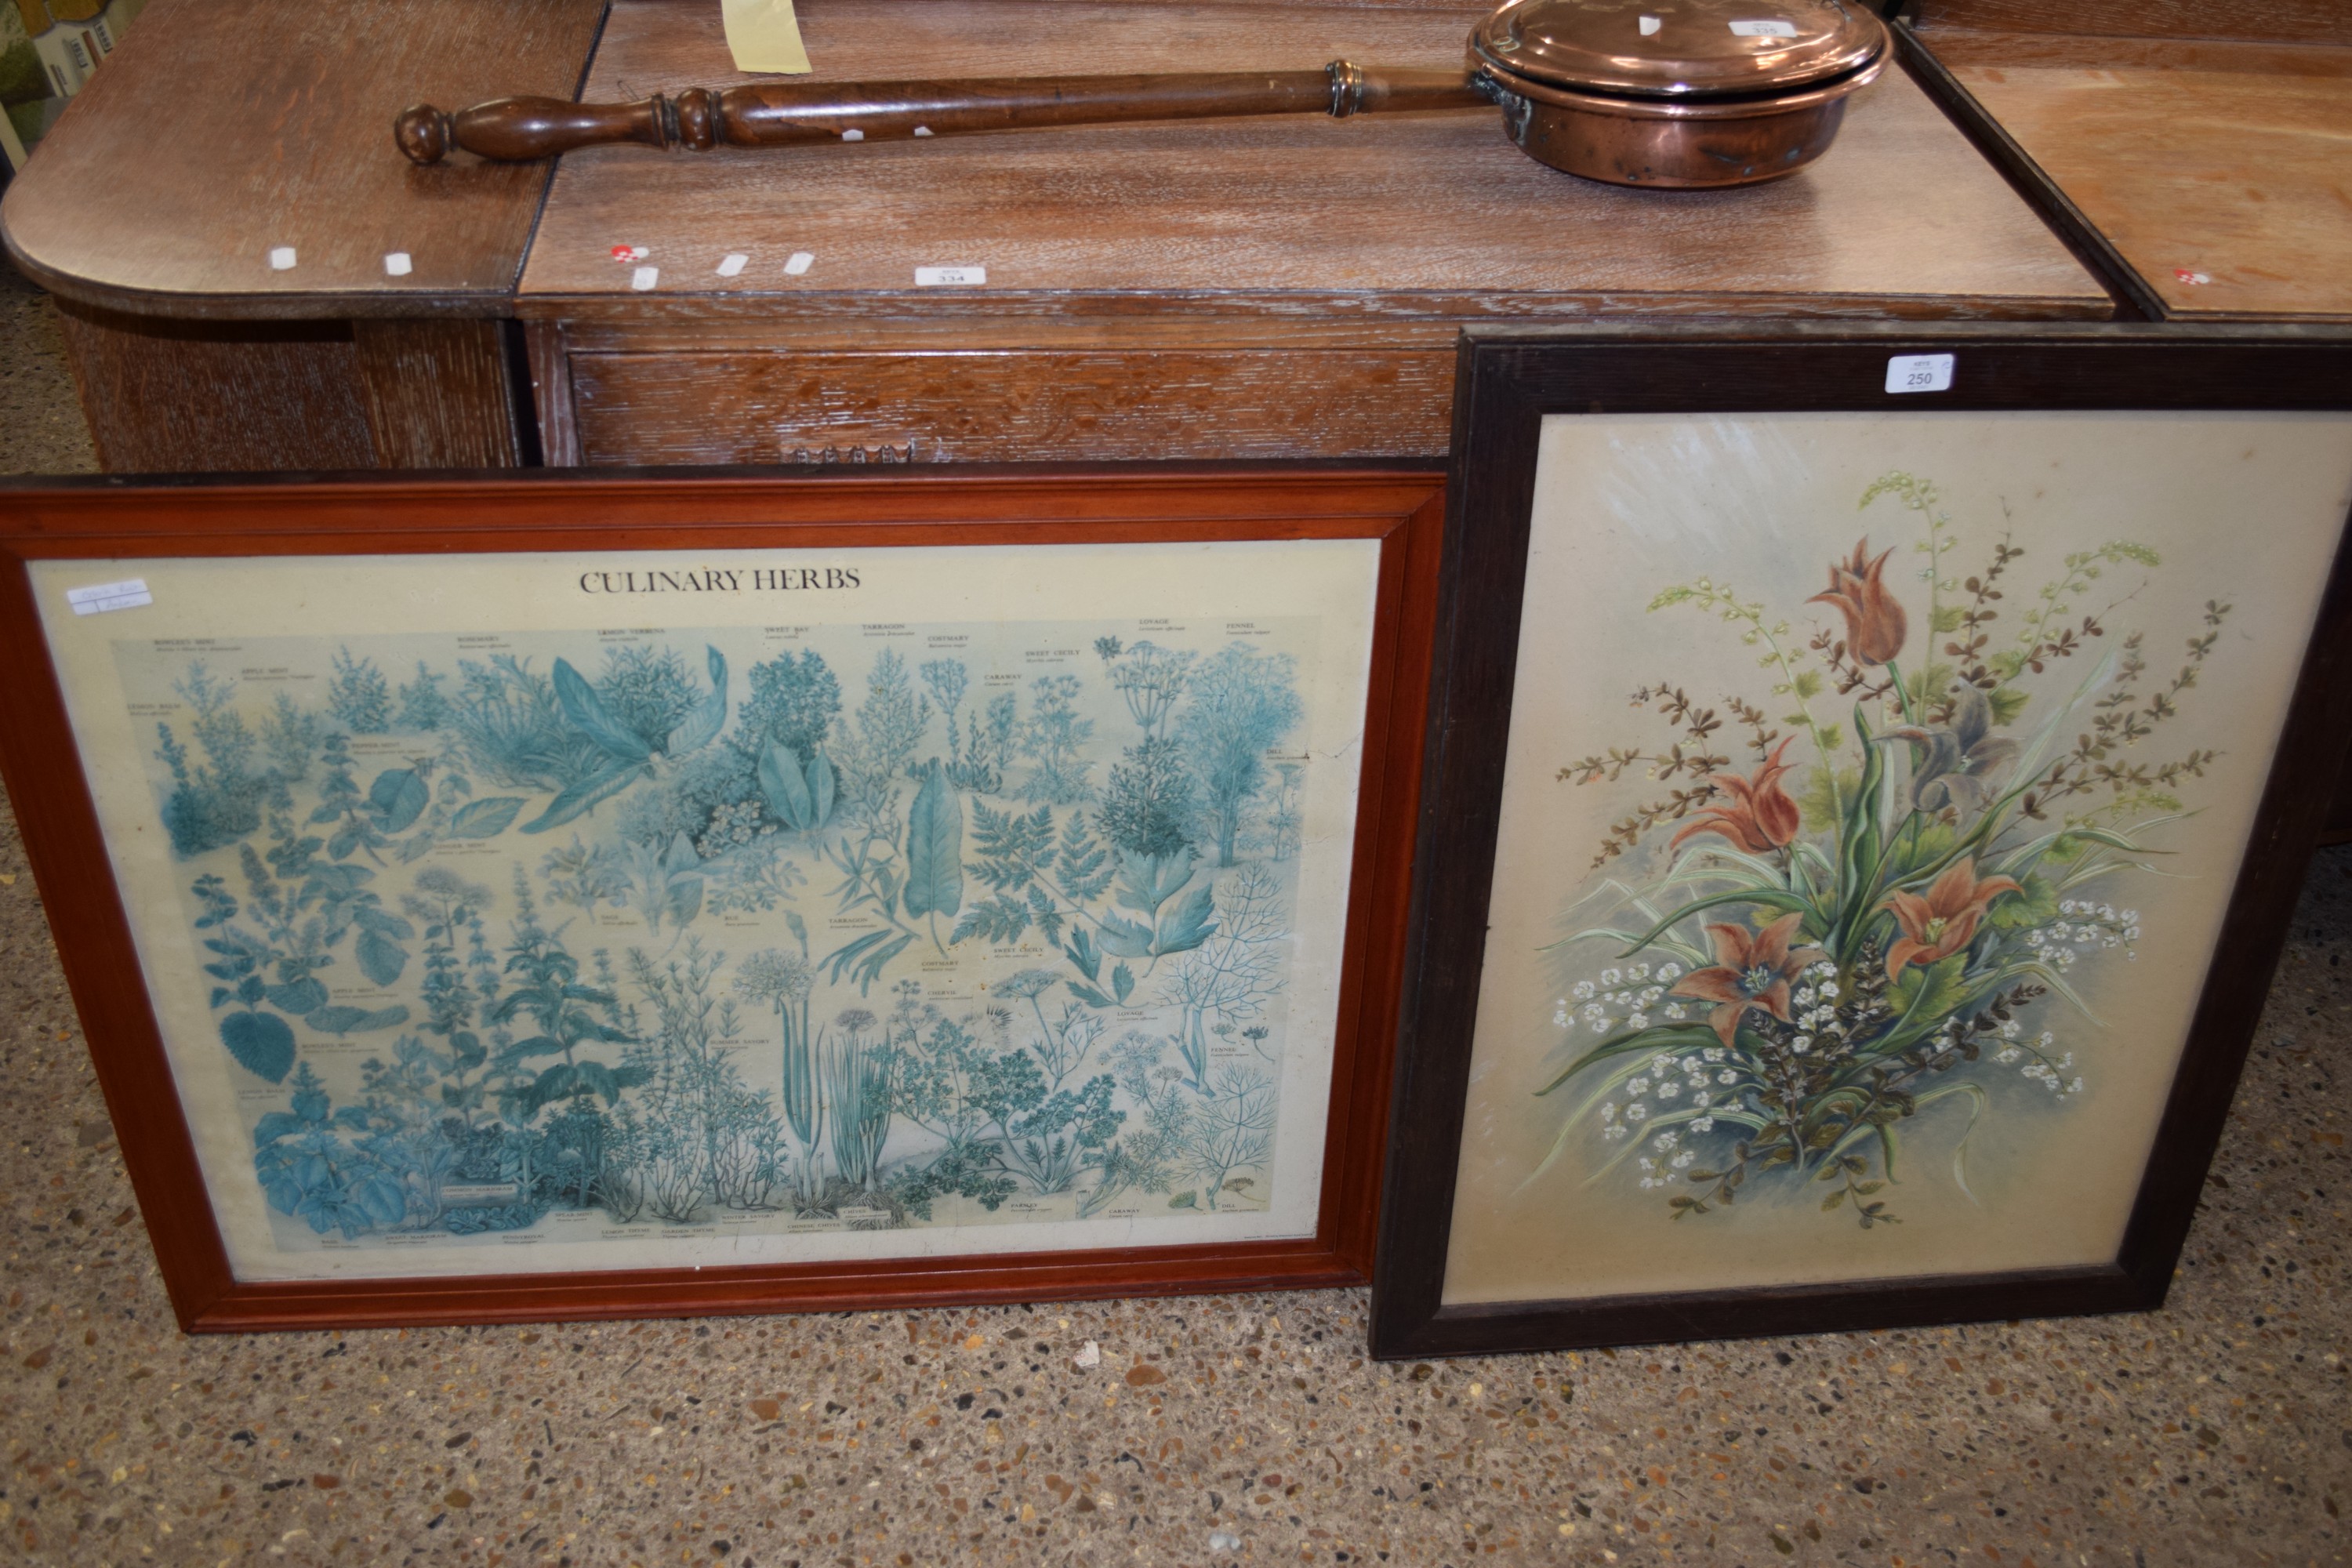 PRINTS OF HERBS AND FLOWERS IN WOODEN FRAMES